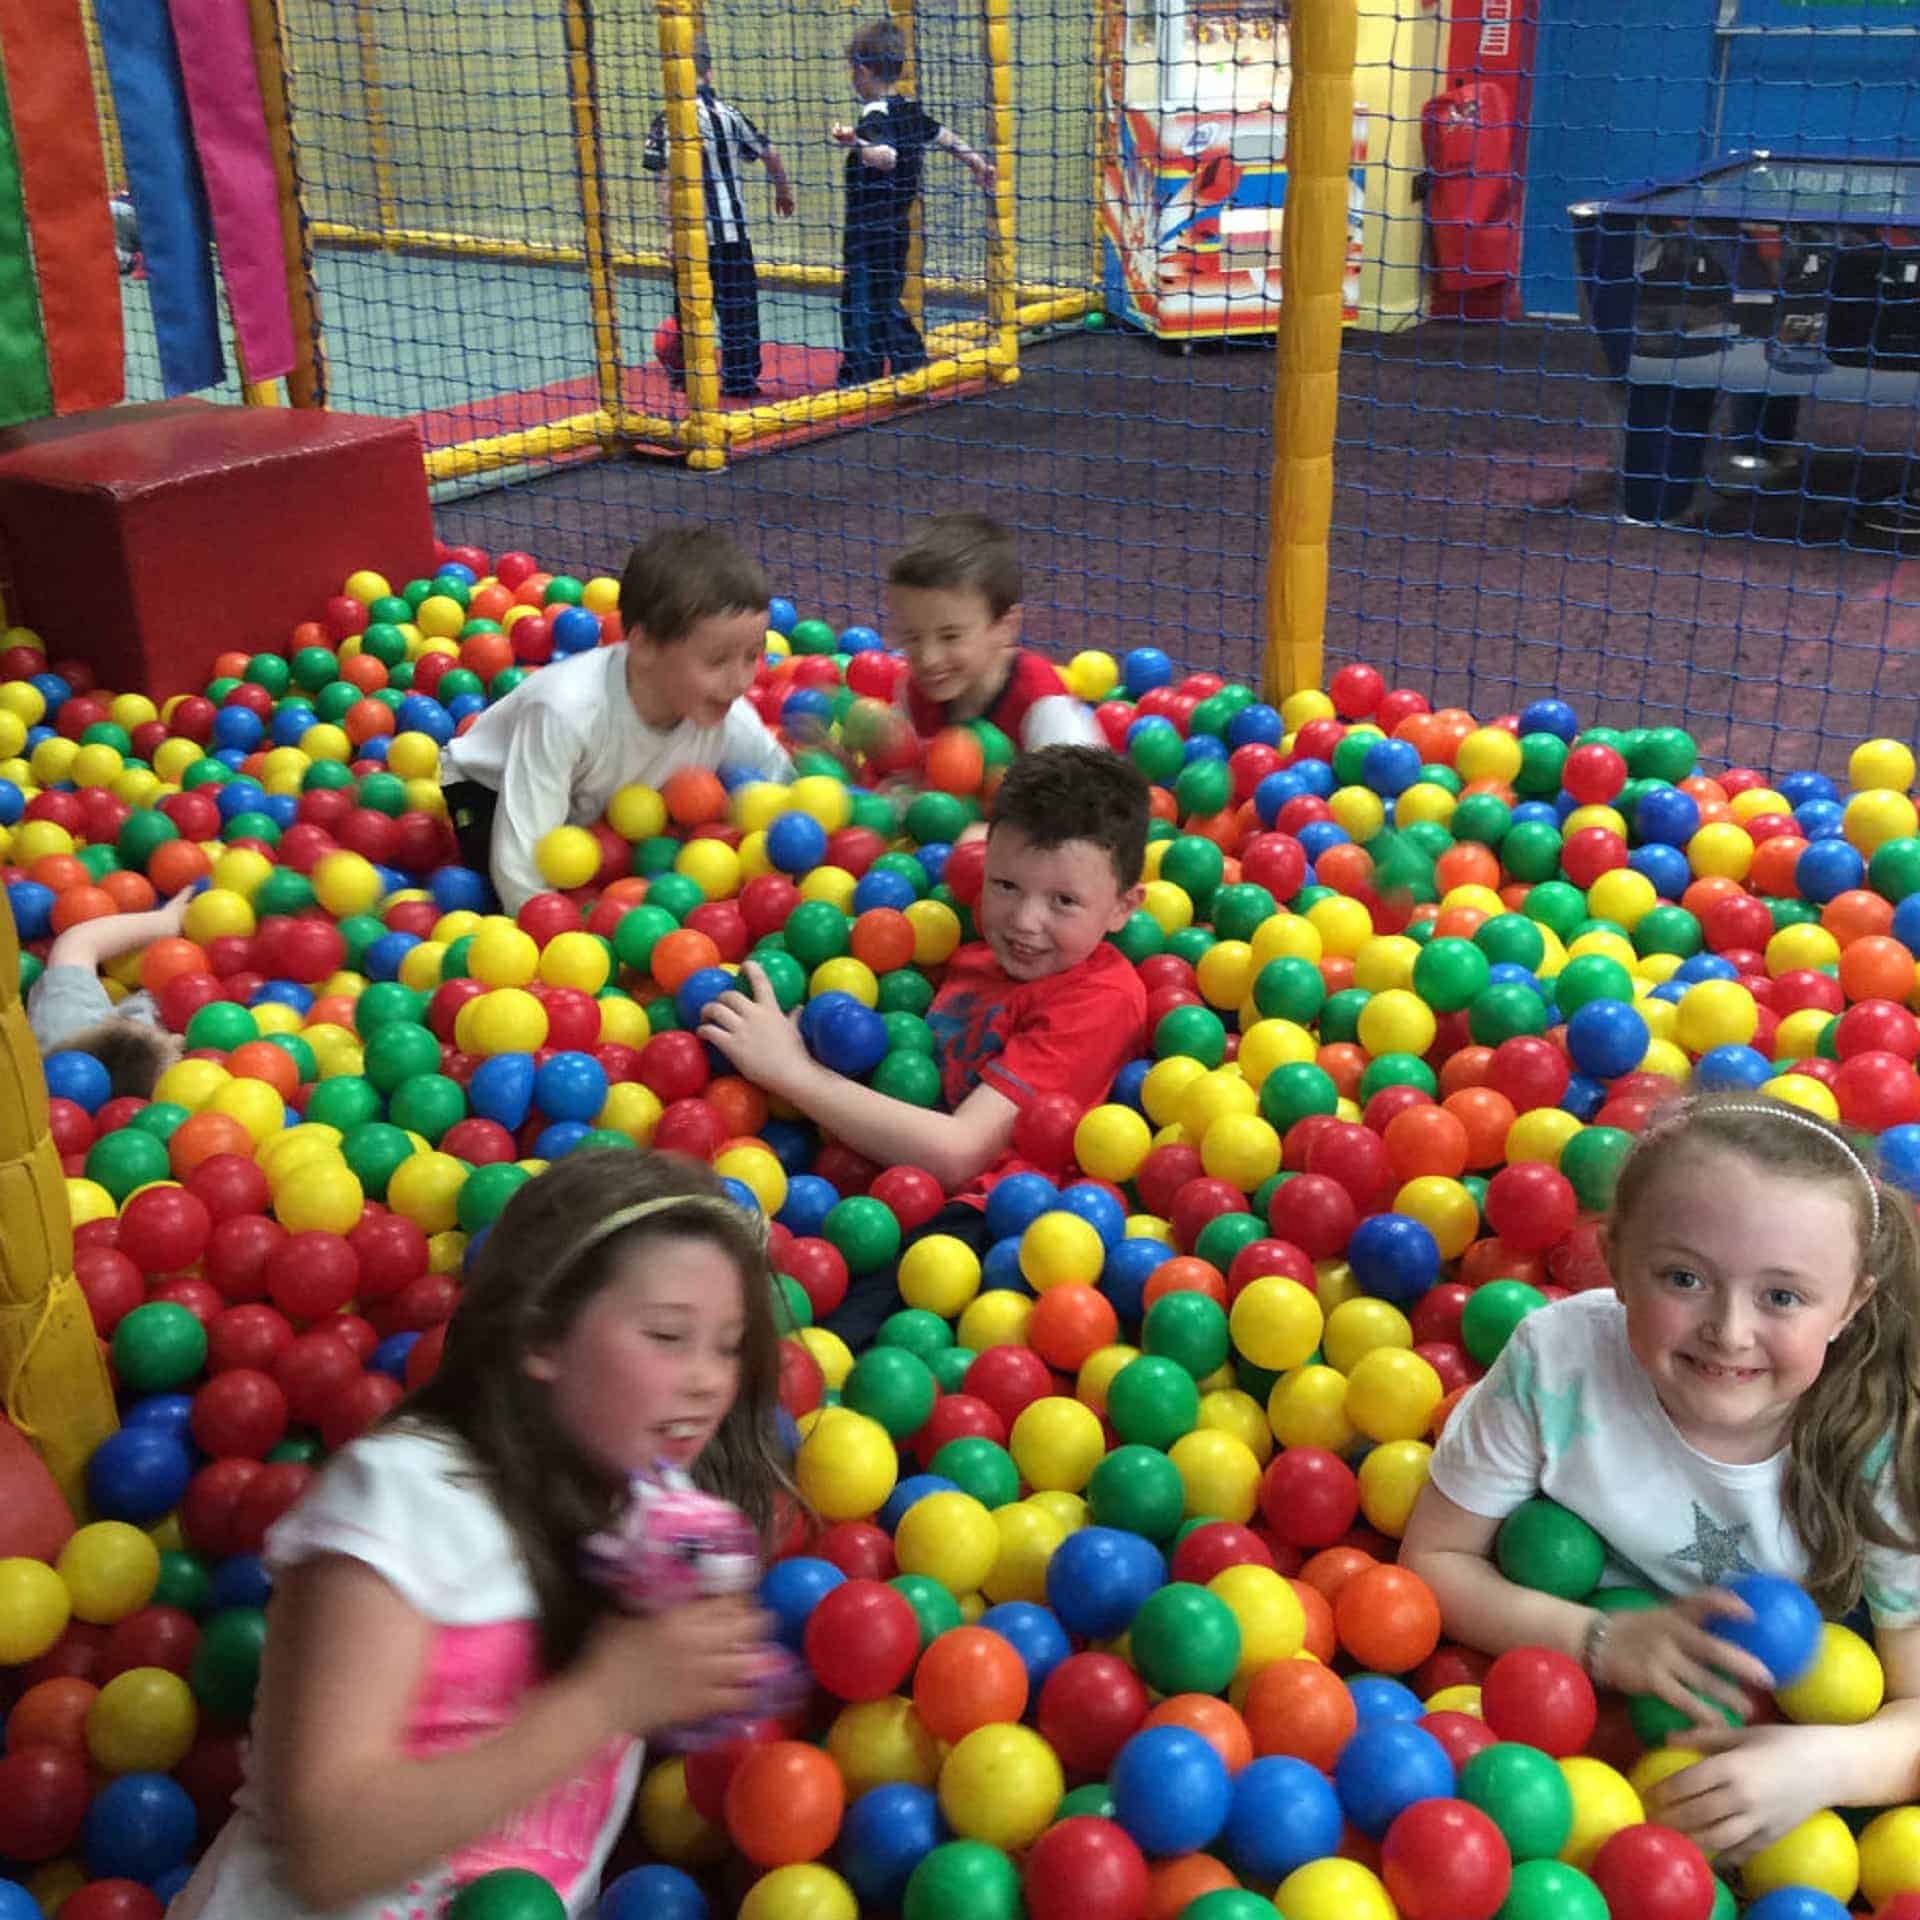 The Fun House Newry in UK